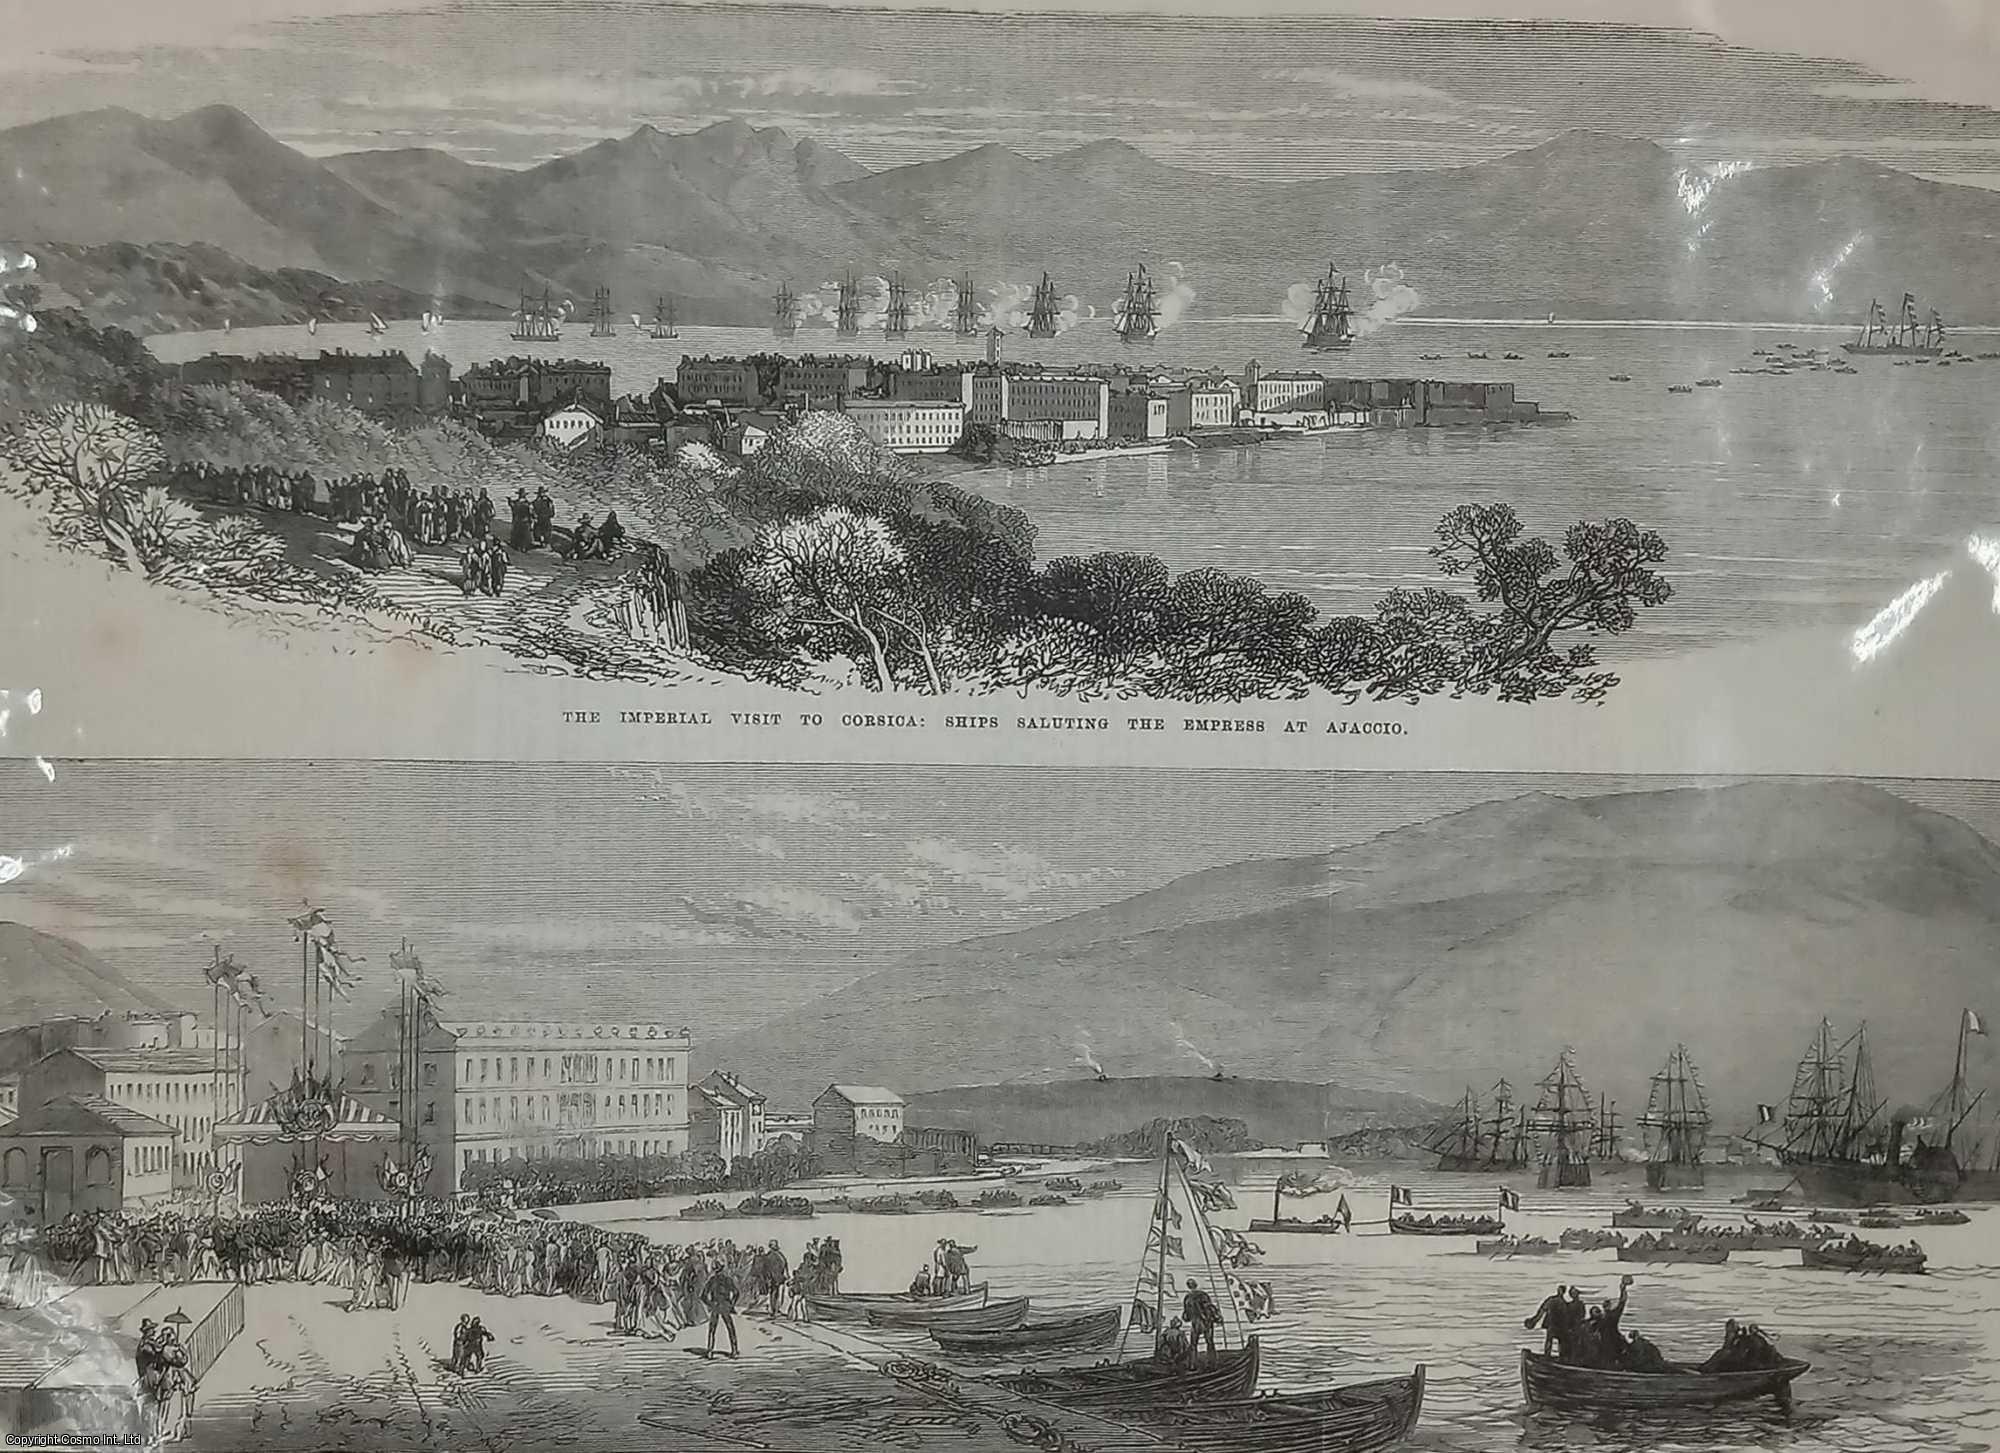 CORSICA - Ajaccio, Corsica: Ships Saluting the Empress and the Squadron in the Harbour. Two original prints from the Illustrated London News, 1869.